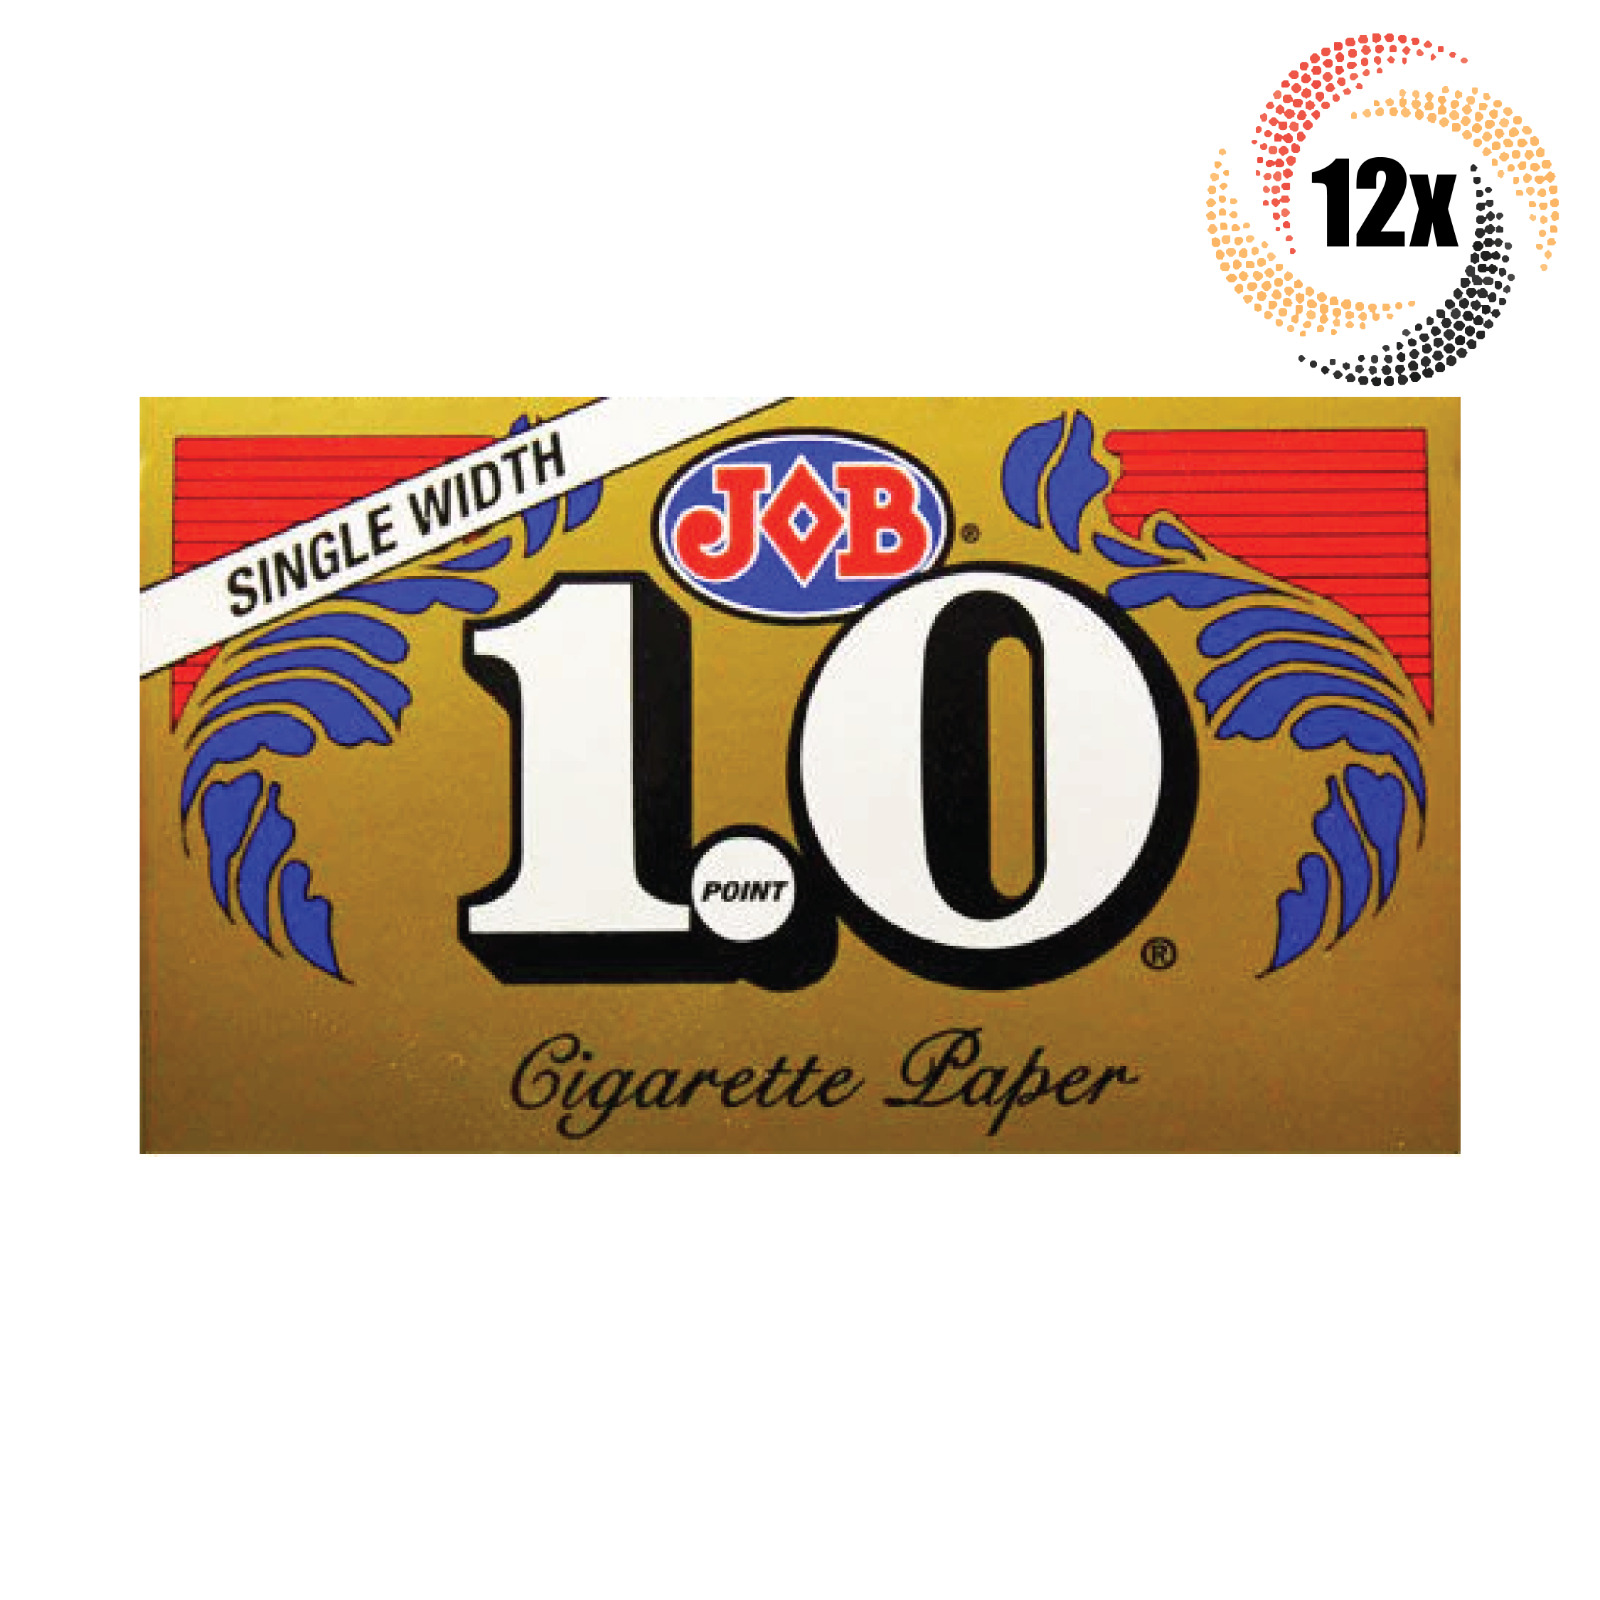 12x Packs Job Gold Single Wide 1.0 | 32 Papers Per Pack | + 2 Free Rolling Tubes